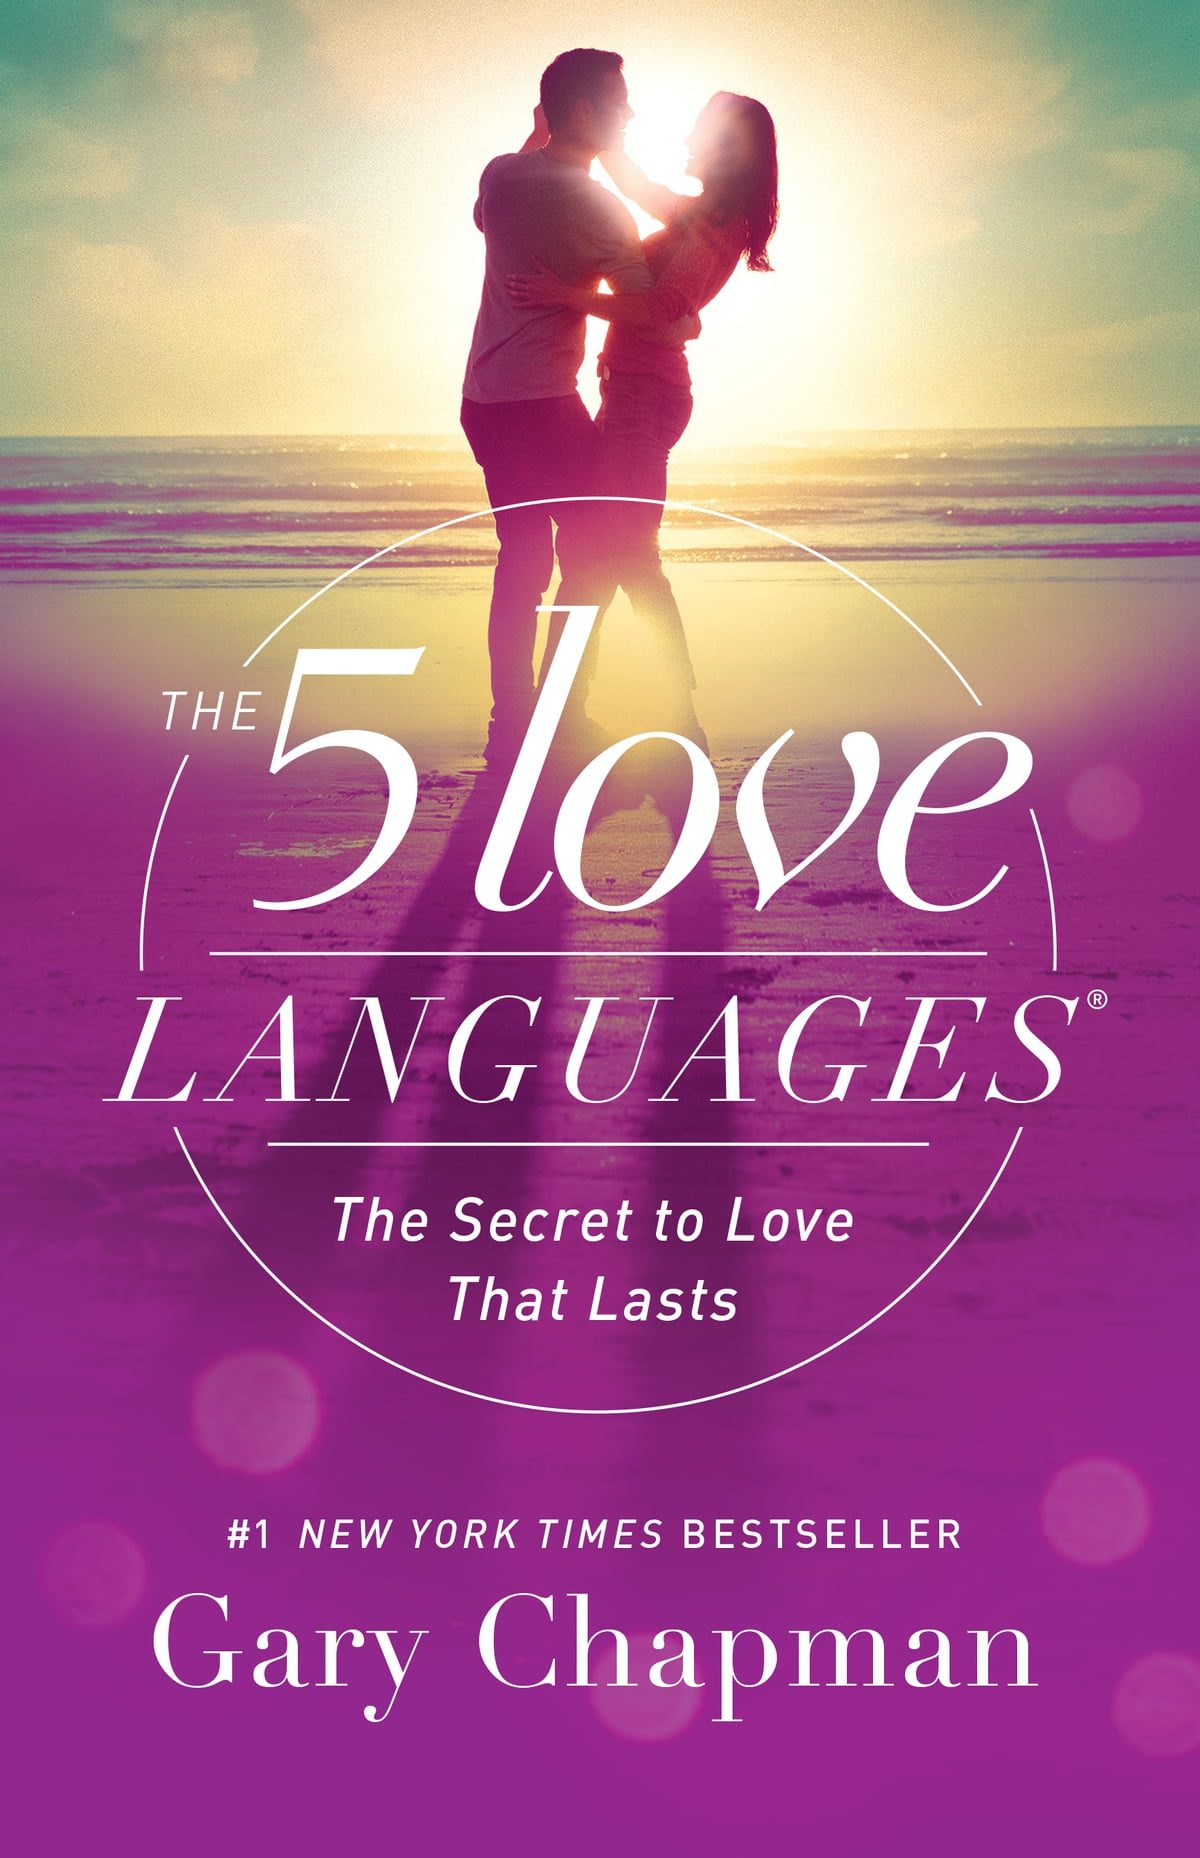 The 5 Love Languages Book Summary